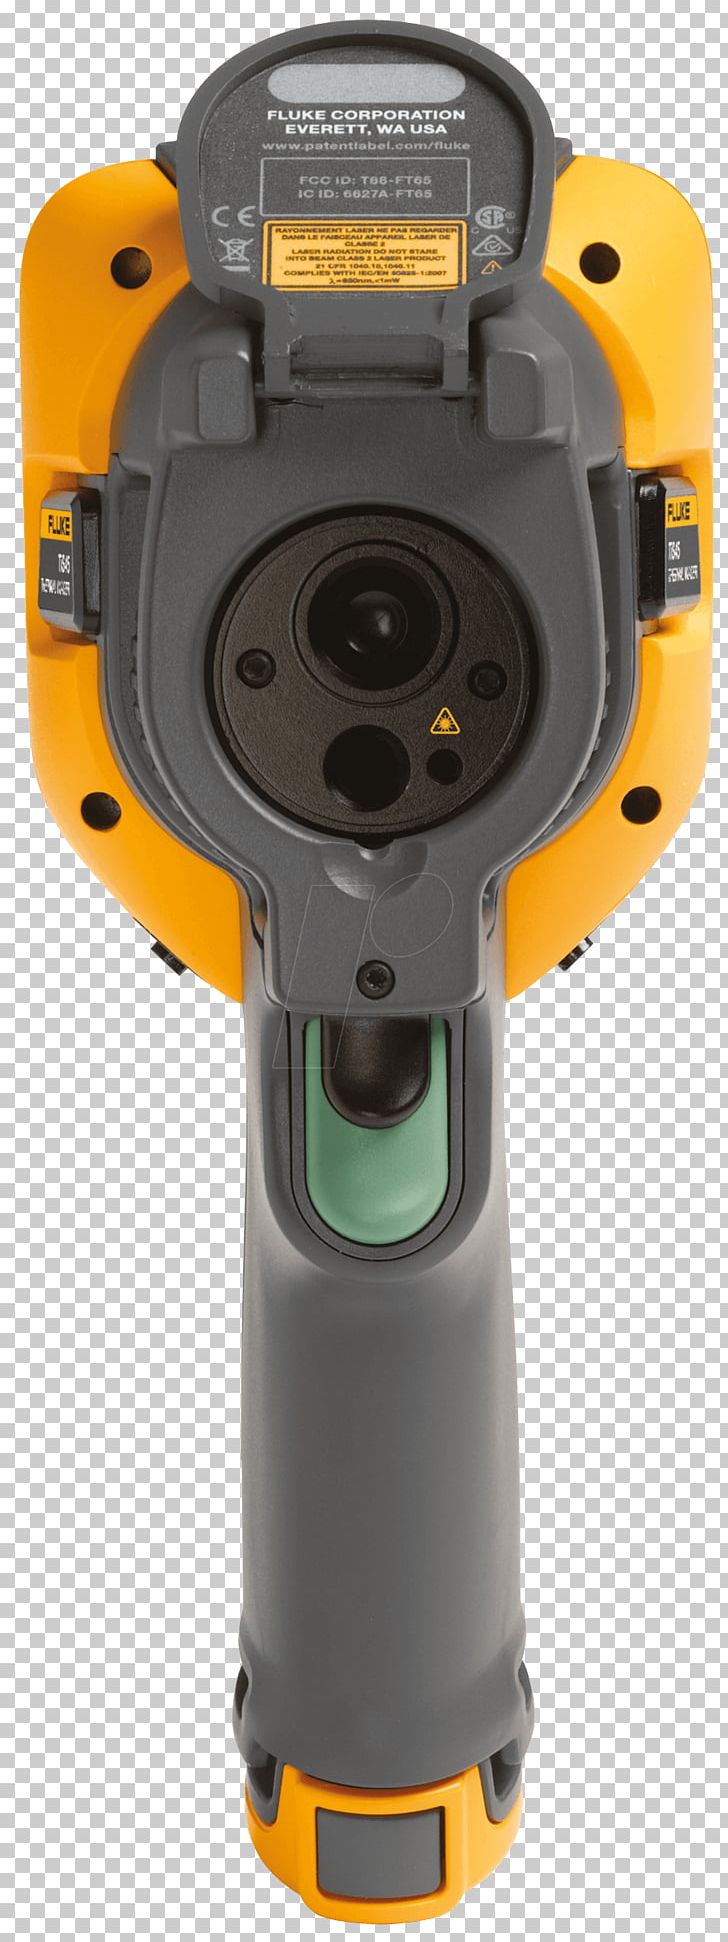 Thermographic Camera Thermal Imaging Camera Fluke Corporation Thermography PNG, Clipart, Angle, Camera, Fixedfocus Lens, Fluke, Fluke Corporation Free PNG Download